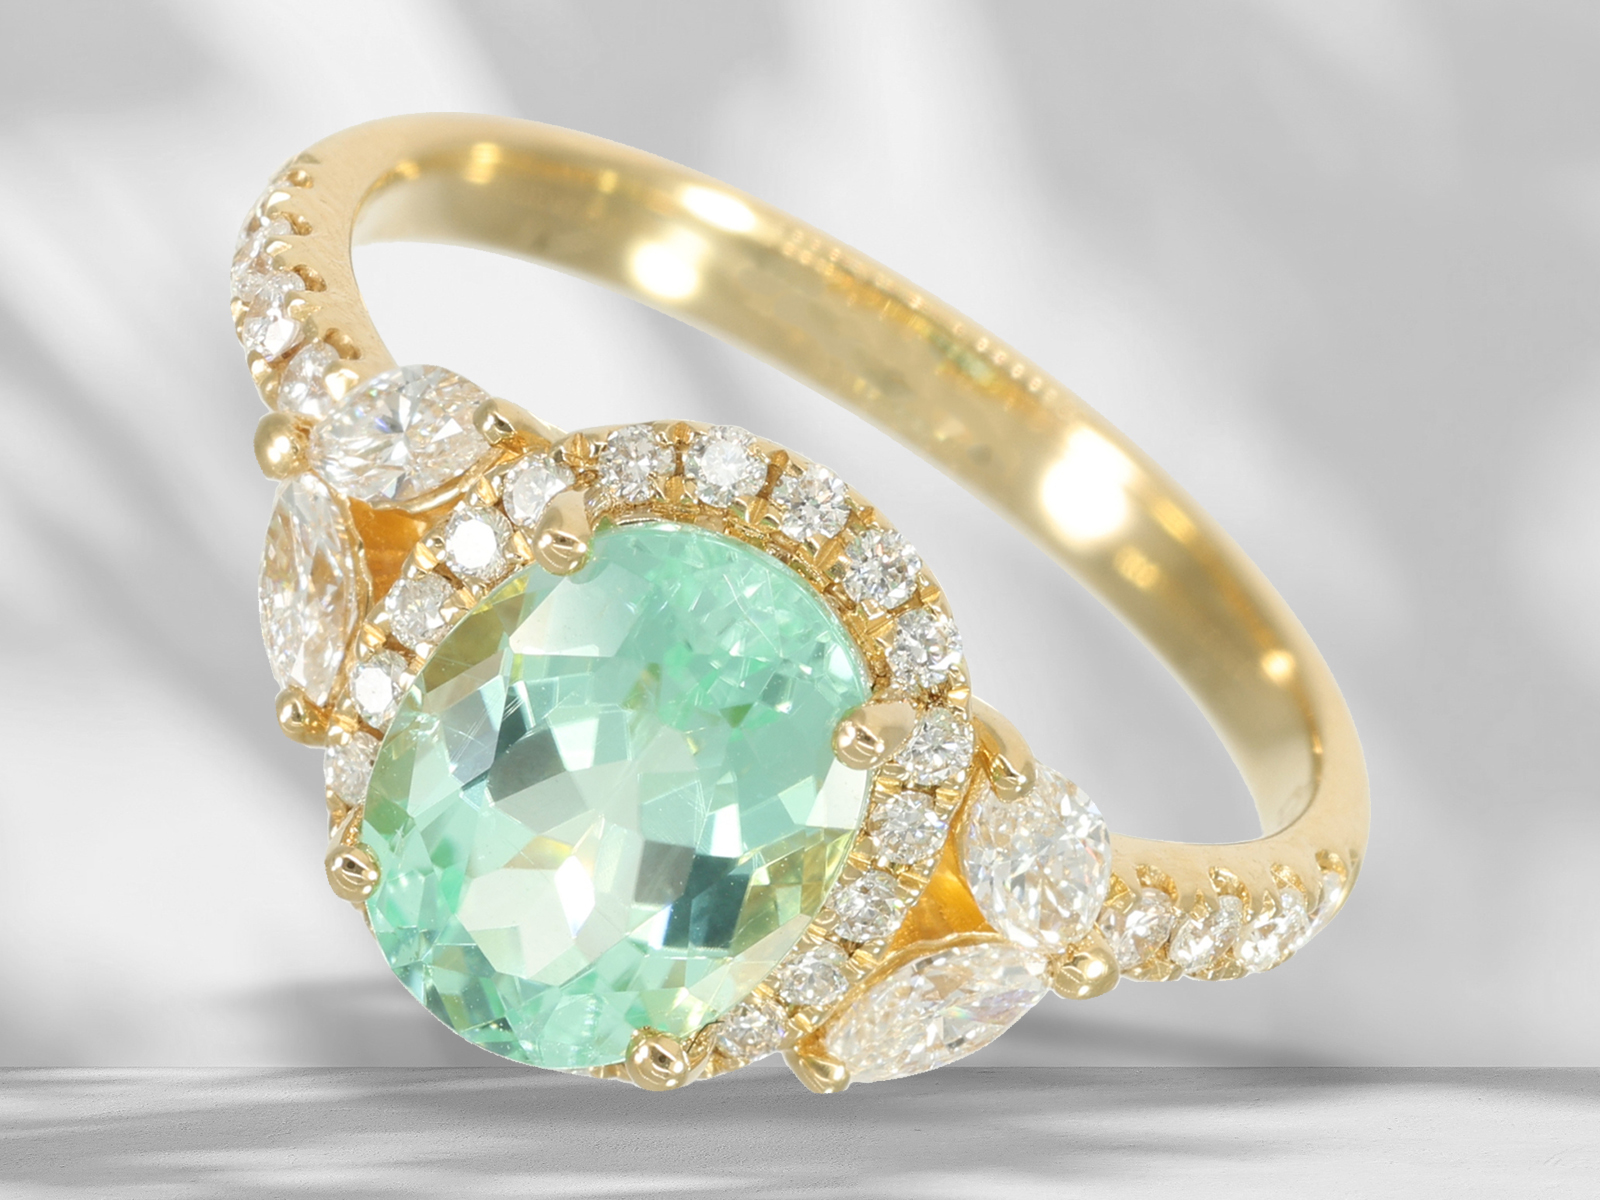 Ring: goldsmith ring with extremely rare Paraiba tourmaline and brilliant-cut diamonds, like new